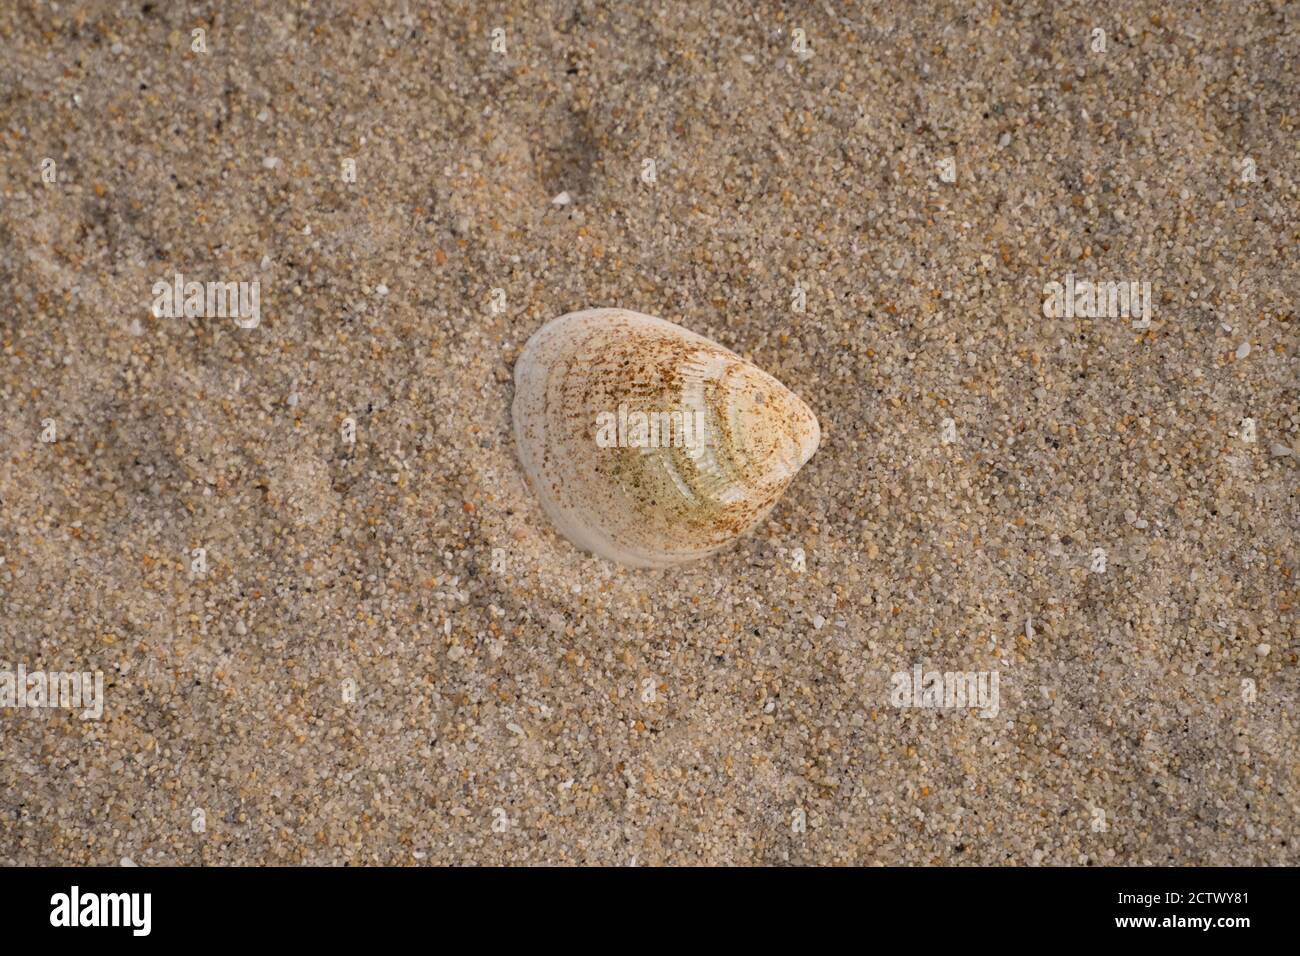 A shell in the sand, Isles of Scilly Stock Photo